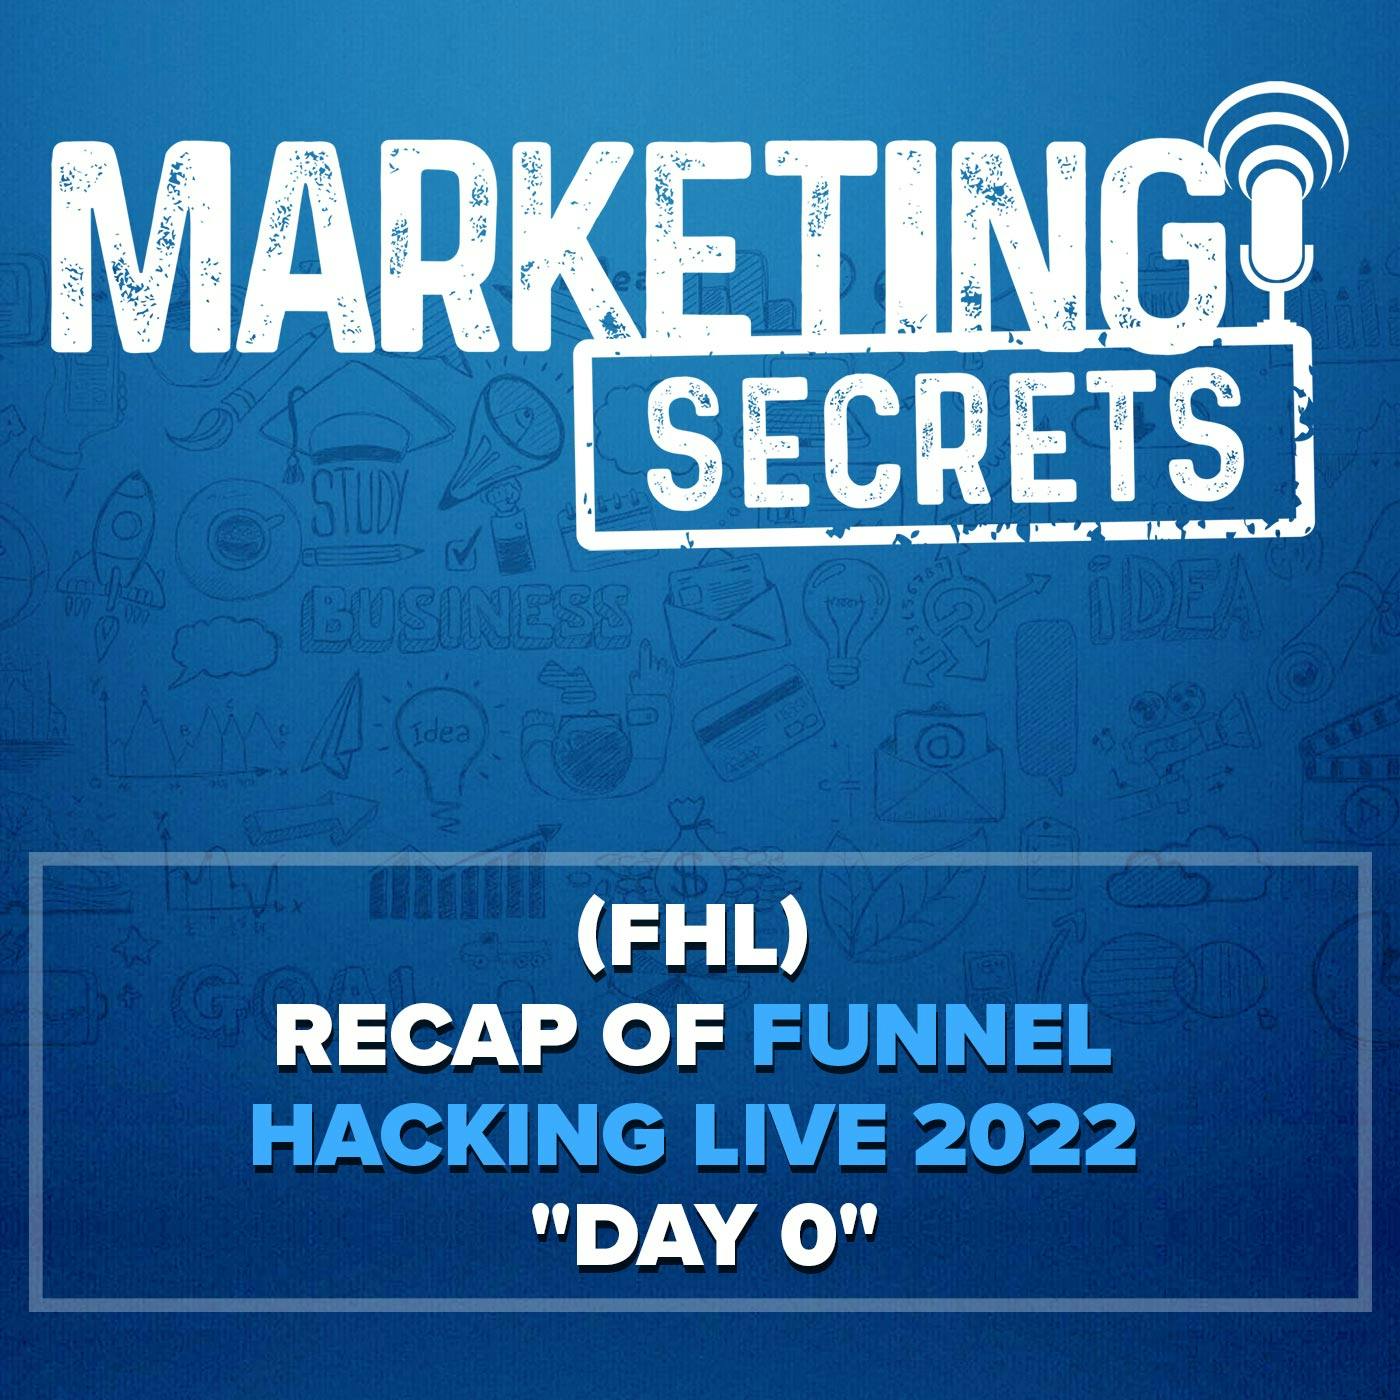 (FHL) Recap of Funnel Hacking Live 2022 "Day 0"